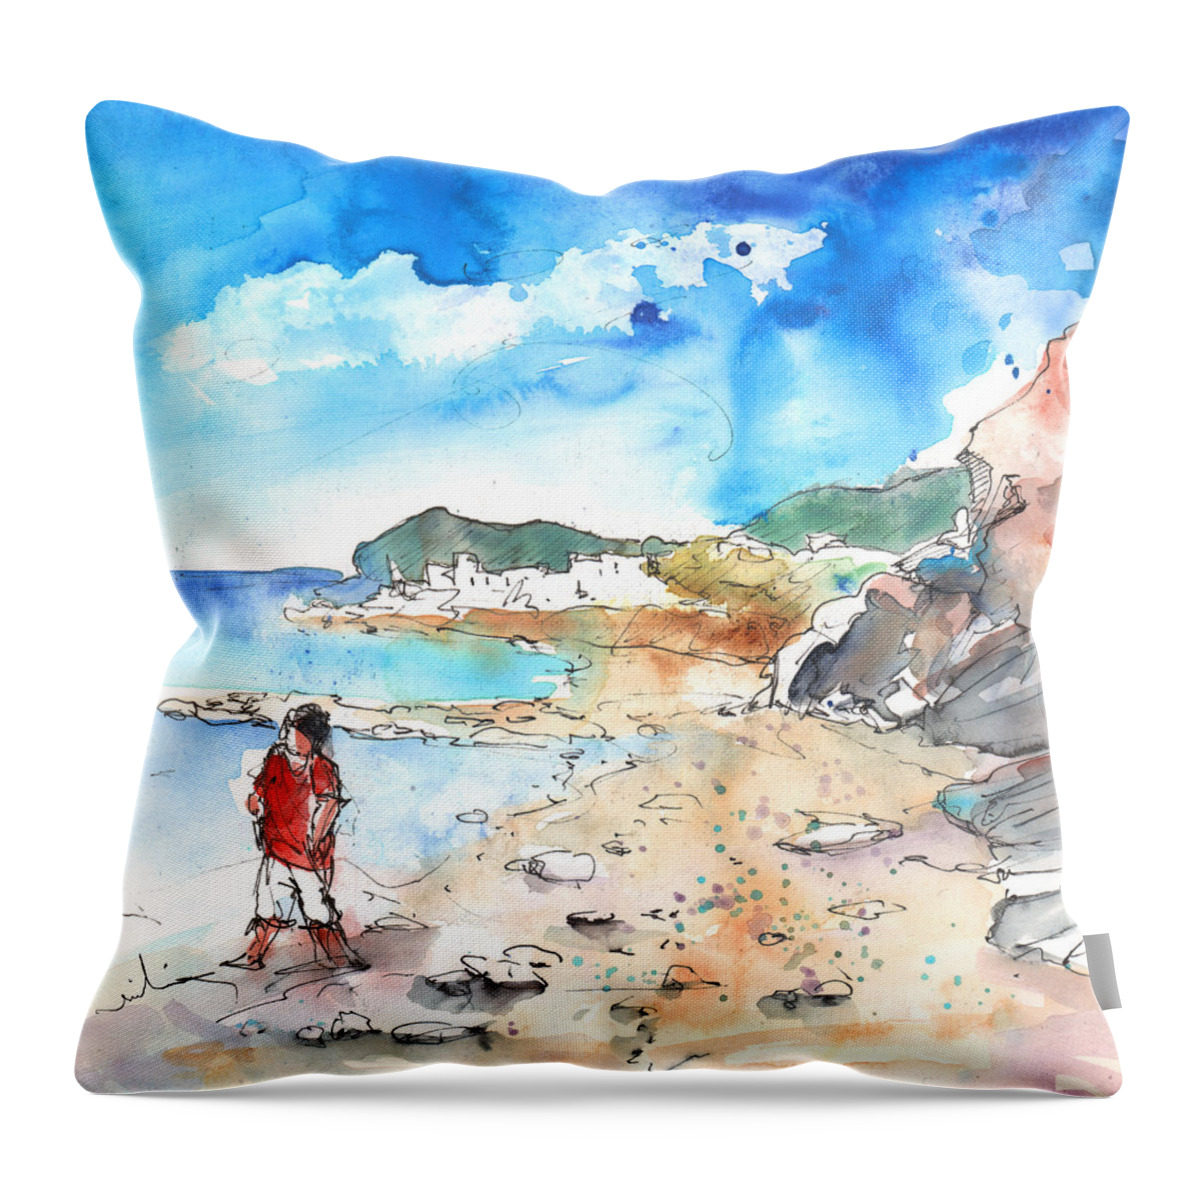 Travel Sketch Throw Pillow featuring the painting Agia Galini 01 by Miki De Goodaboom